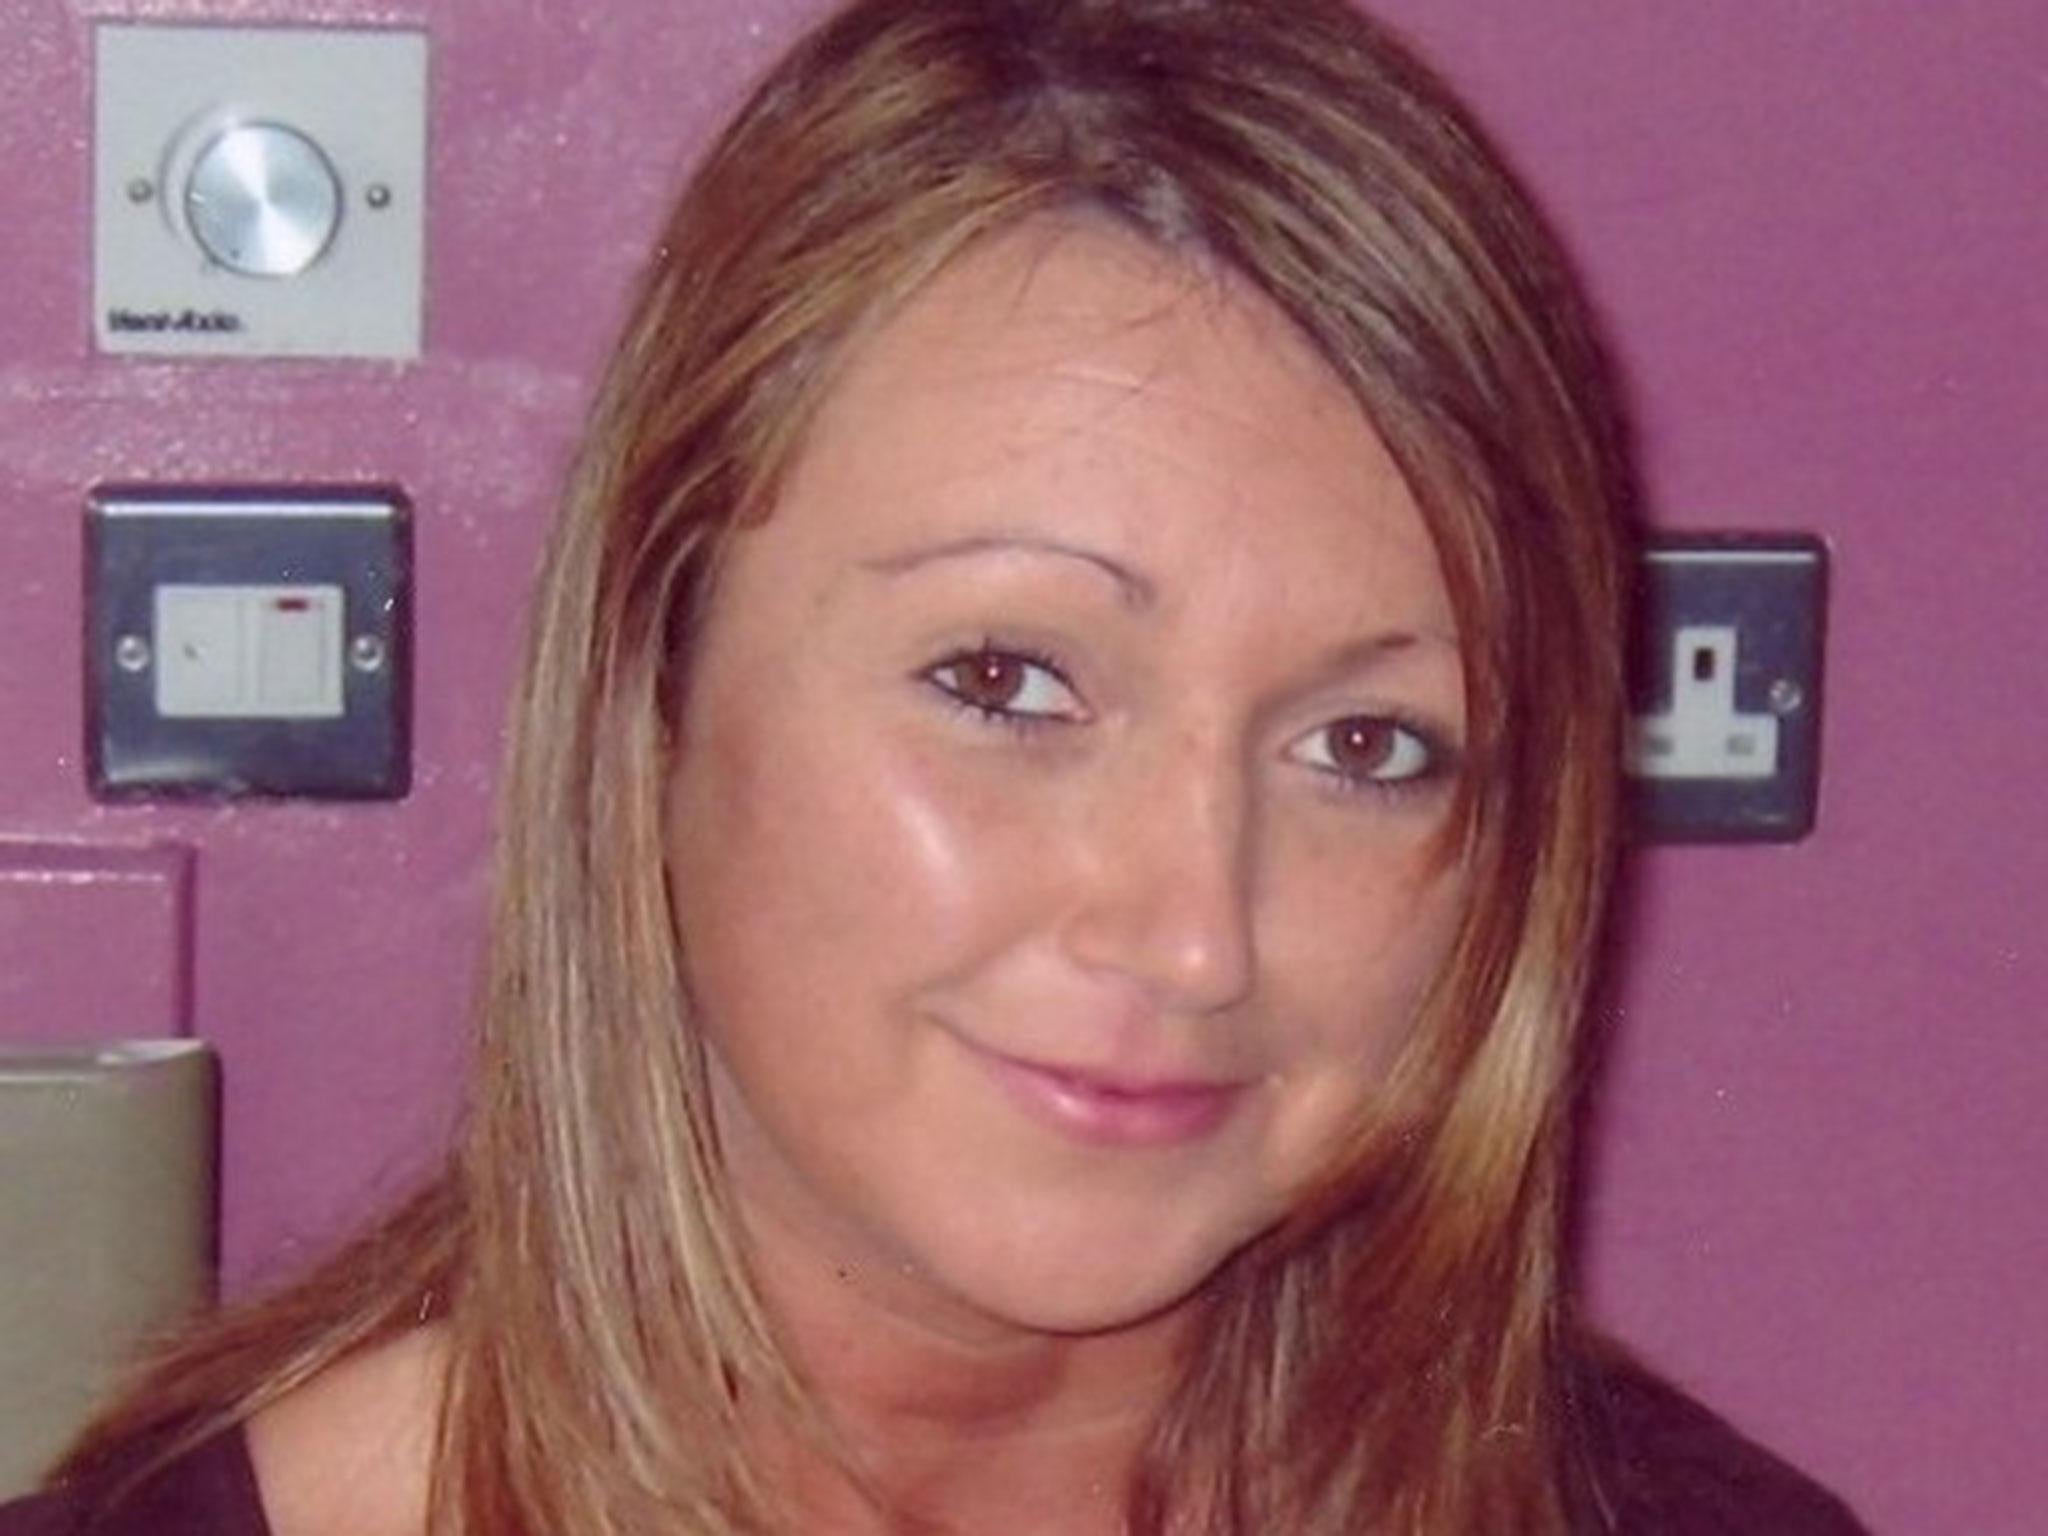 Photo issued by North Yorkshire Police of Claudia Lawrence, as officers carried out searches of an alleyway outside her home on 25 February, 2015